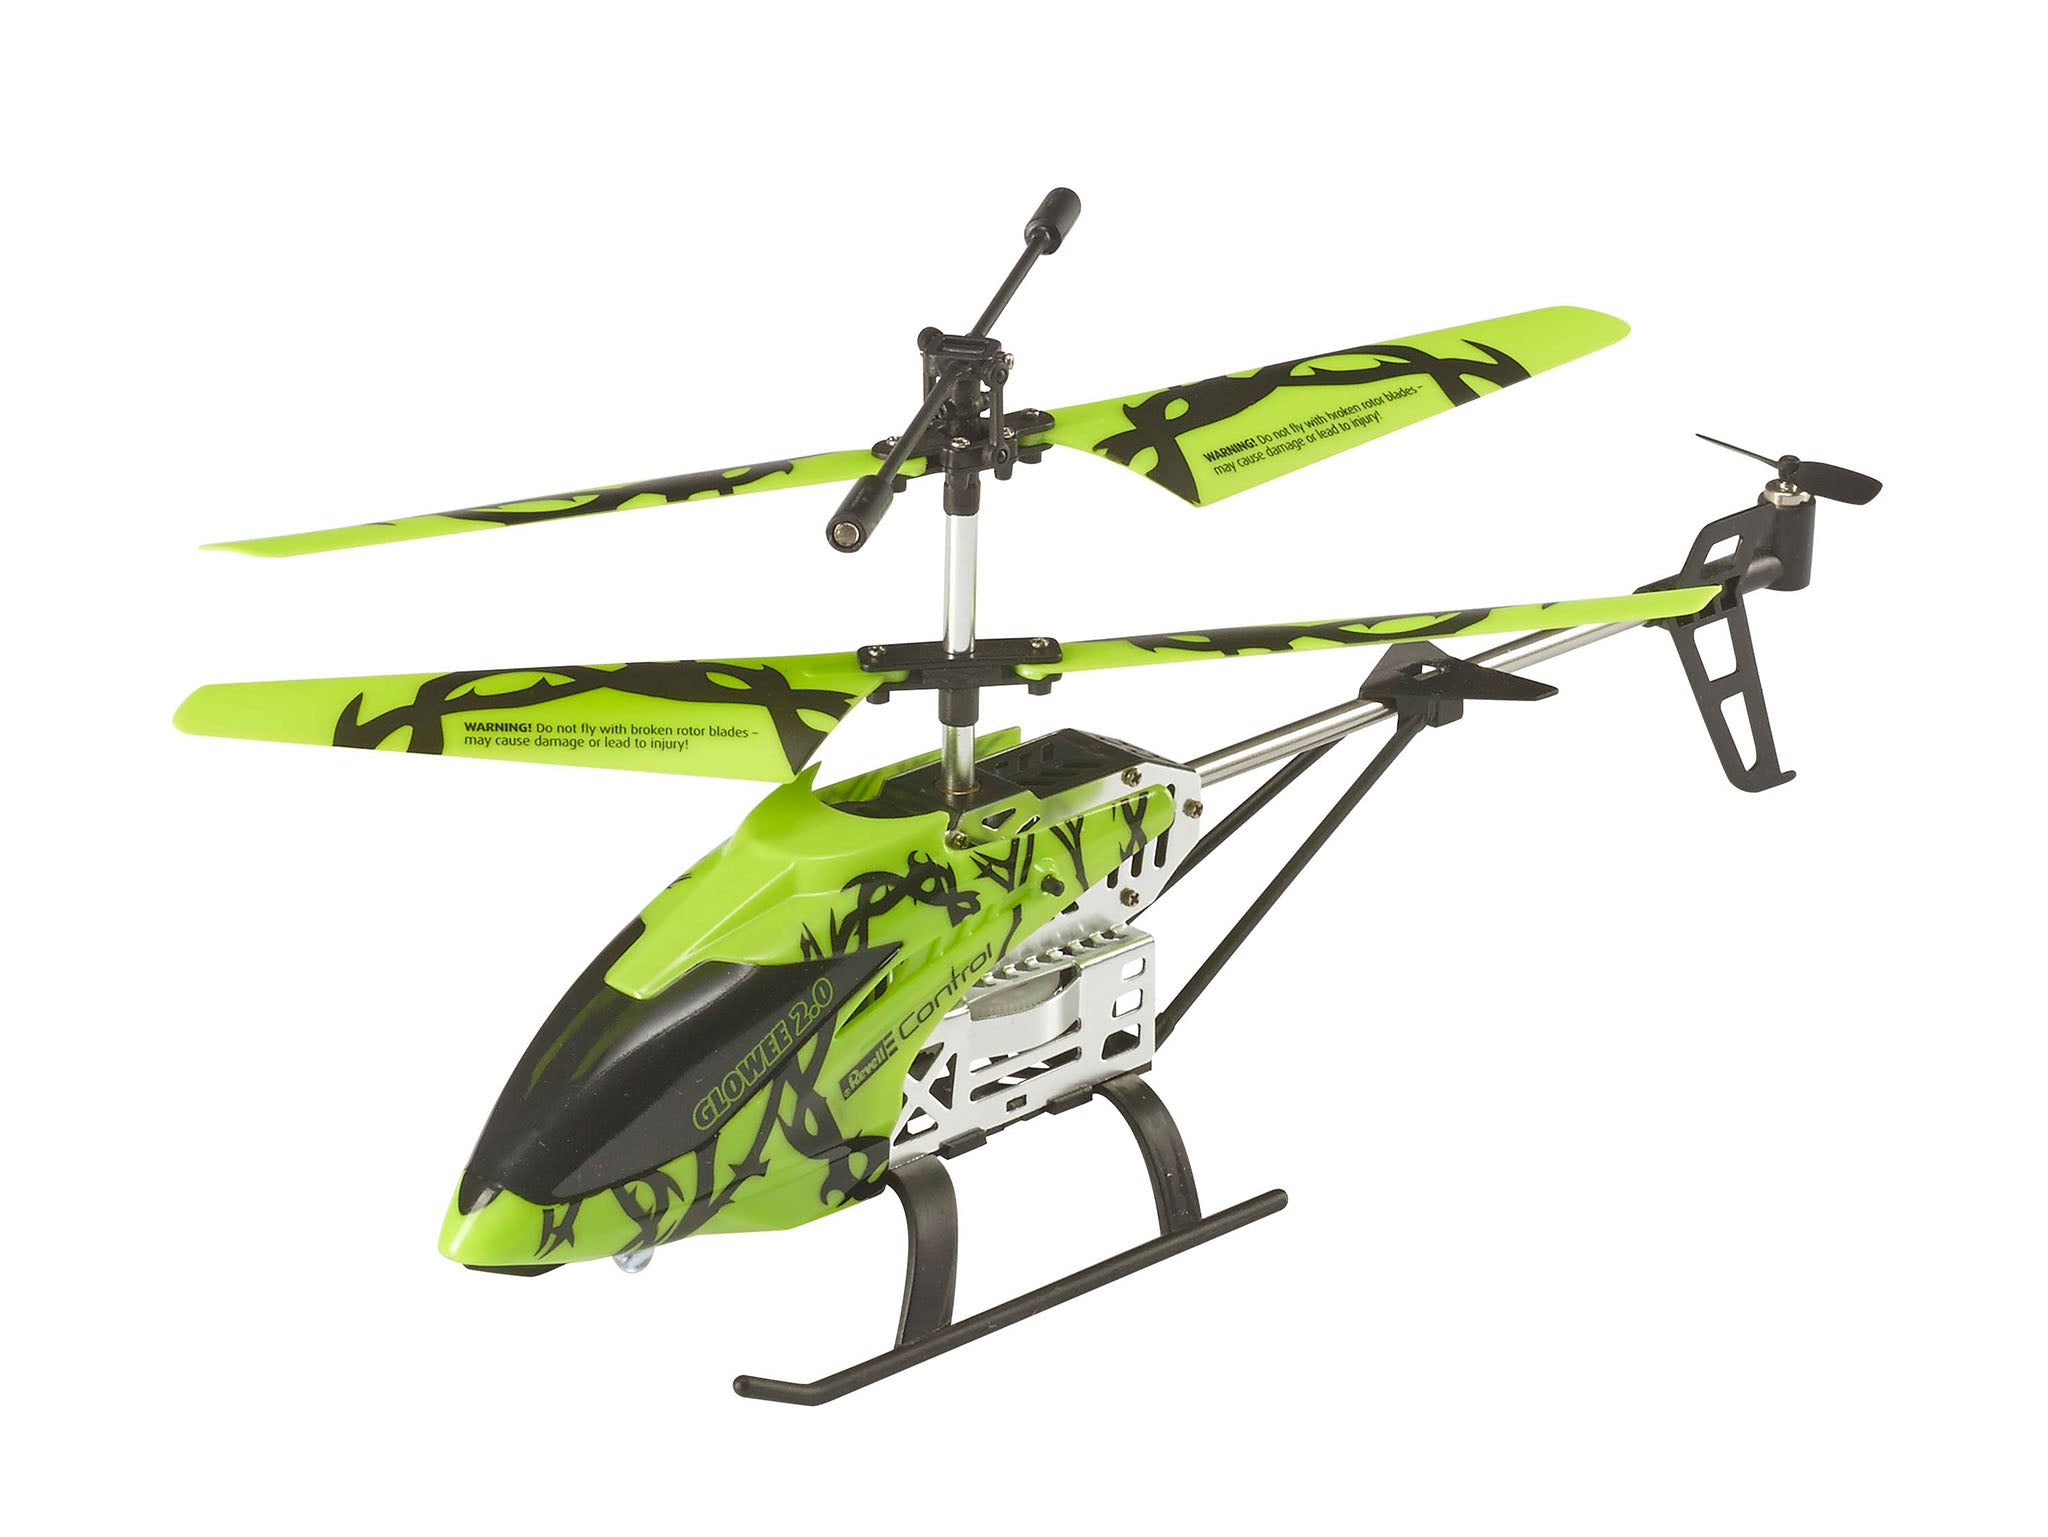 Radio Control Helicopter Revell RC Helicopter Glowee 2.0 Alternate 1